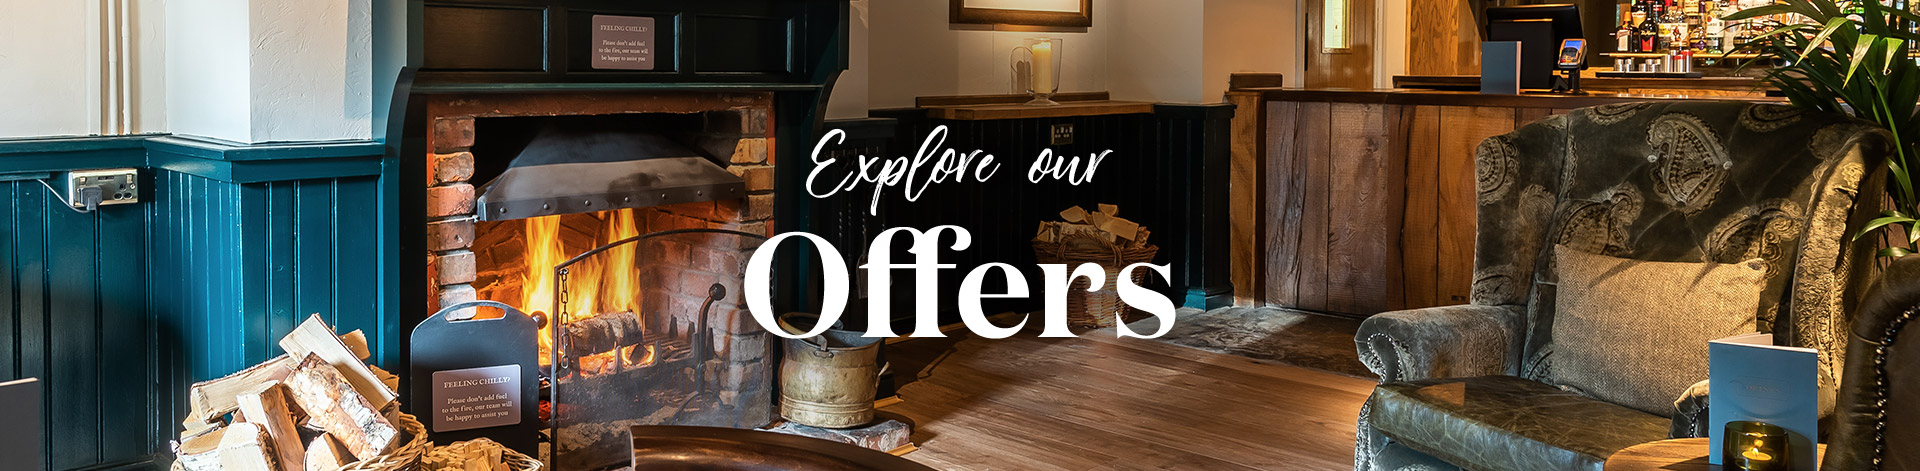 Our latest offers at The Curlew